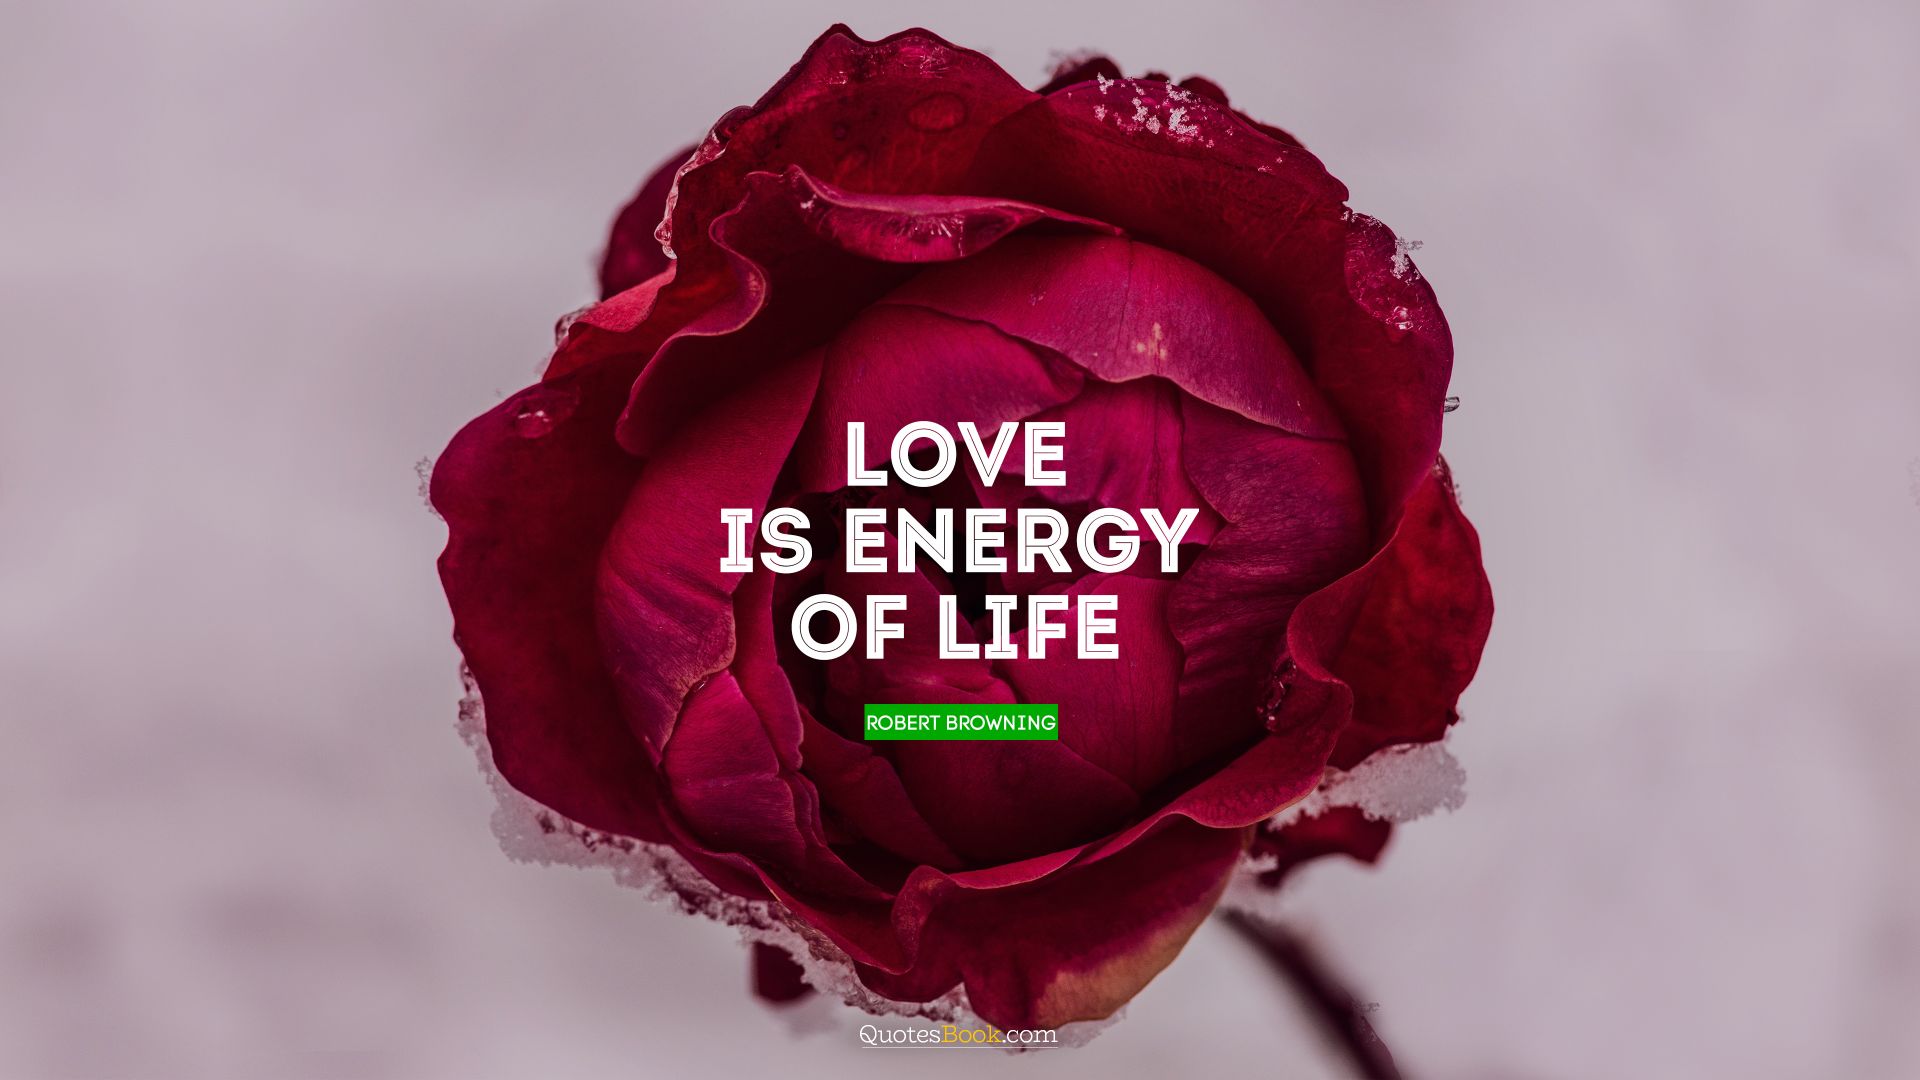 Love is energy of life. - Quote by Robert Browning